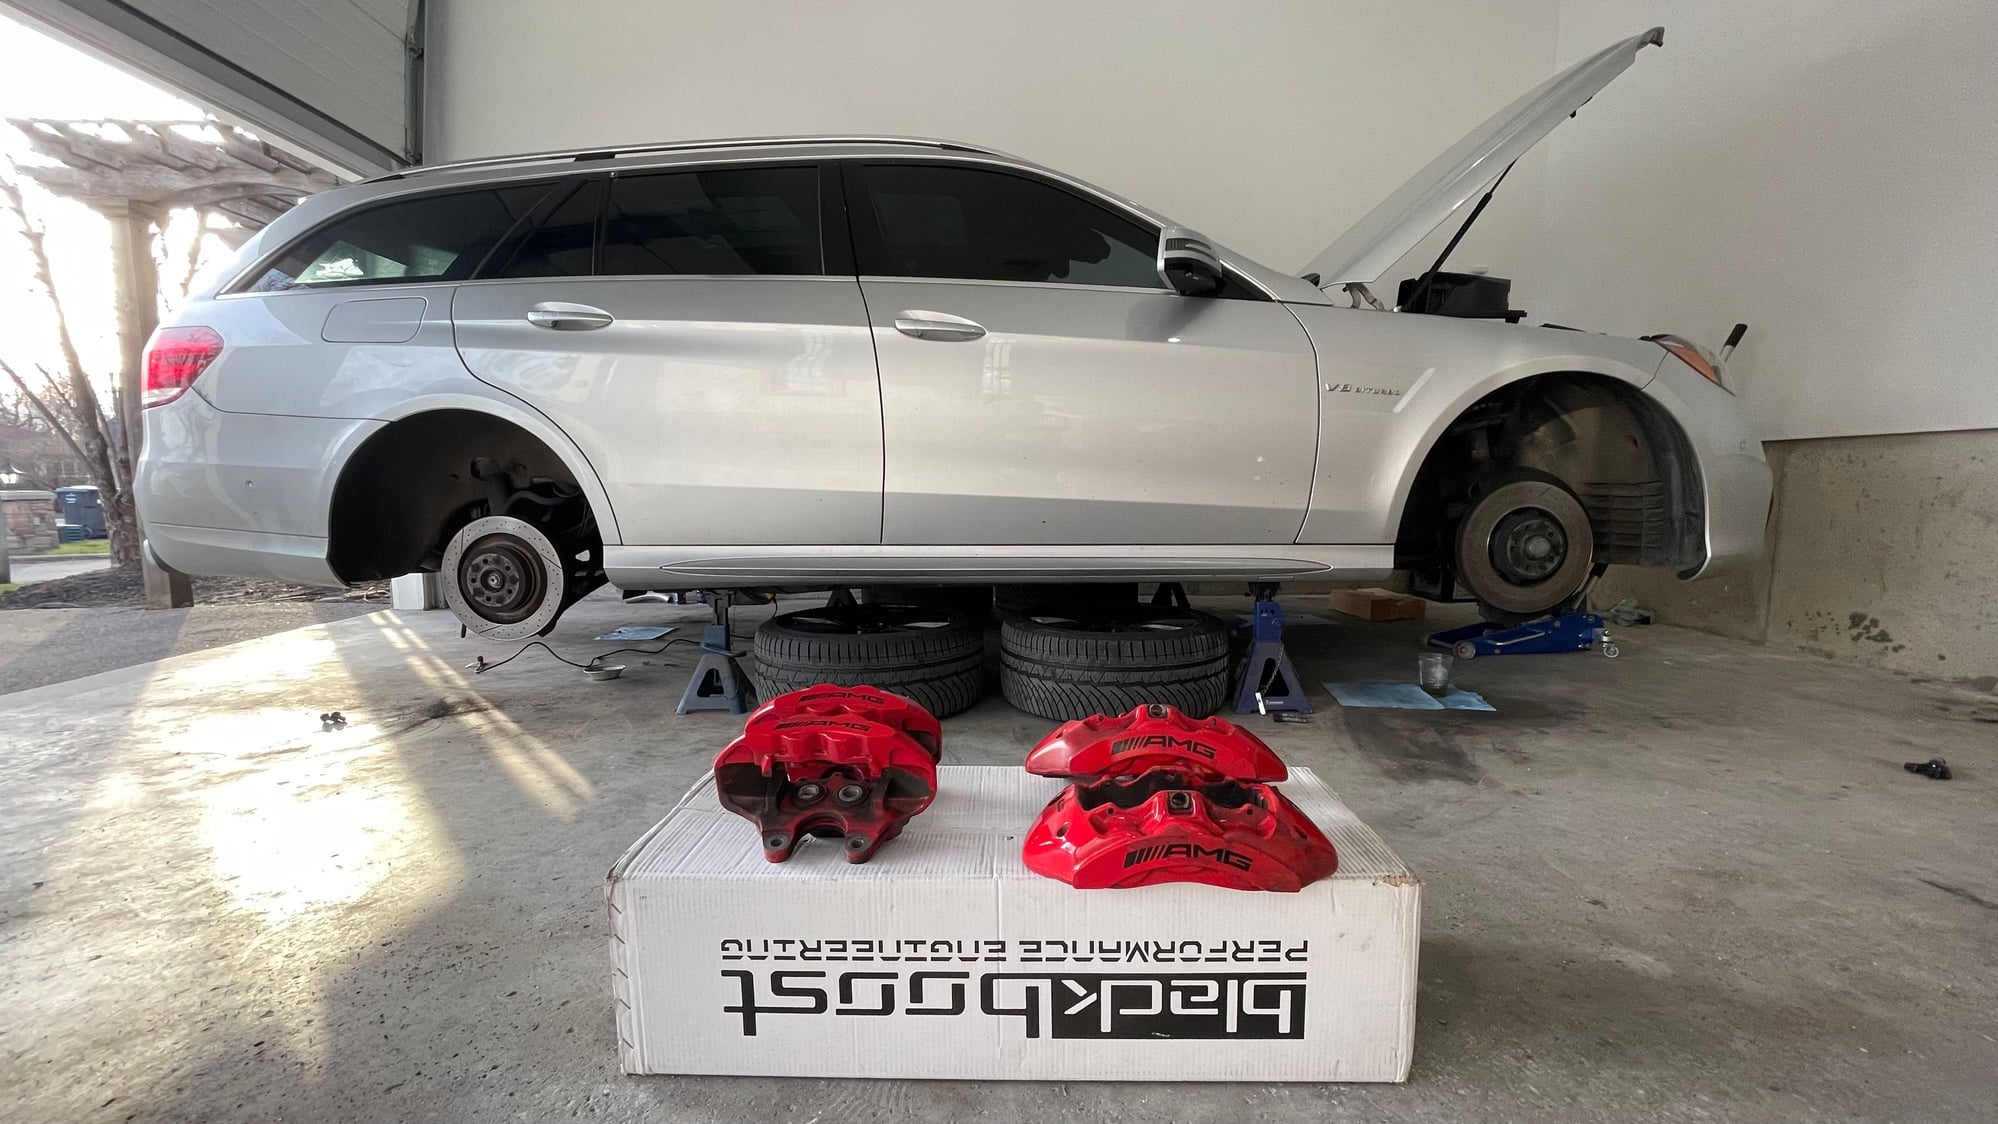 E63S Iron to Carbon Brake Upgrade pics and part numbers - MBWorld